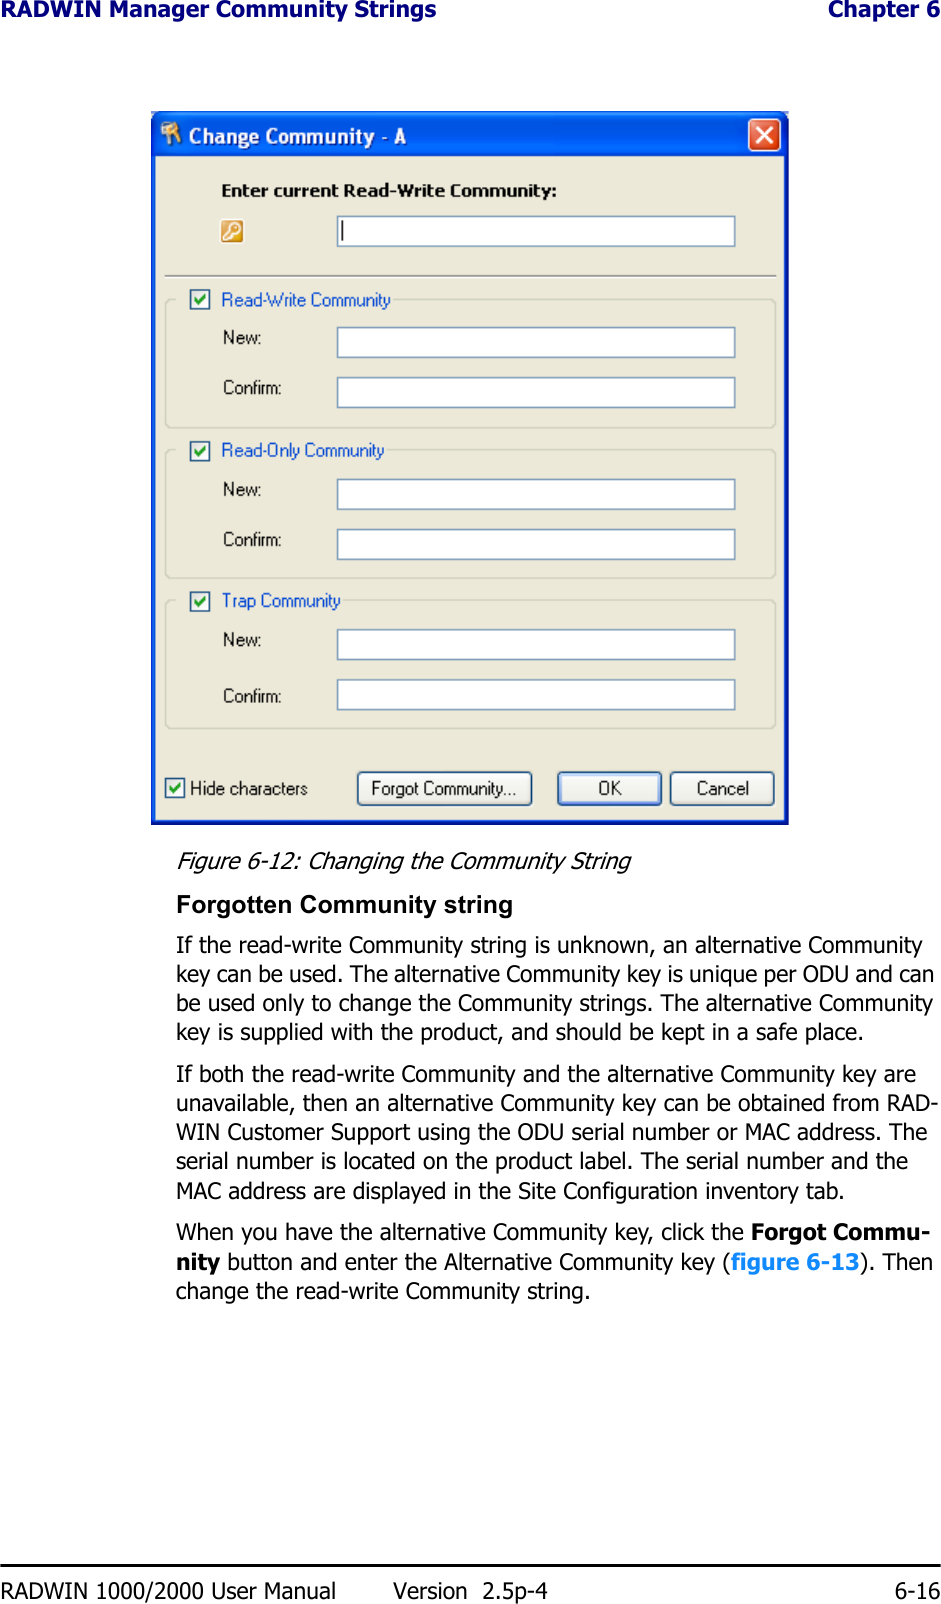 RADWIN Manager Community Strings  Chapter 6RADWIN 1000/2000 User Manual Version  2.5p-4 6-16Figure 6-12: Changing the Community StringForgotten Community stringIf the read-write Community string is unknown, an alternative Community key can be used. The alternative Community key is unique per ODU and can be used only to change the Community strings. The alternative Community key is supplied with the product, and should be kept in a safe place. If both the read-write Community and the alternative Community key are unavailable, then an alternative Community key can be obtained from RAD-WIN Customer Support using the ODU serial number or MAC address. The serial number is located on the product label. The serial number and the MAC address are displayed in the Site Configuration inventory tab.When you have the alternative Community key, click the Forgot Commu-nity button and enter the Alternative Community key (figure 6-13). Then change the read-write Community string.